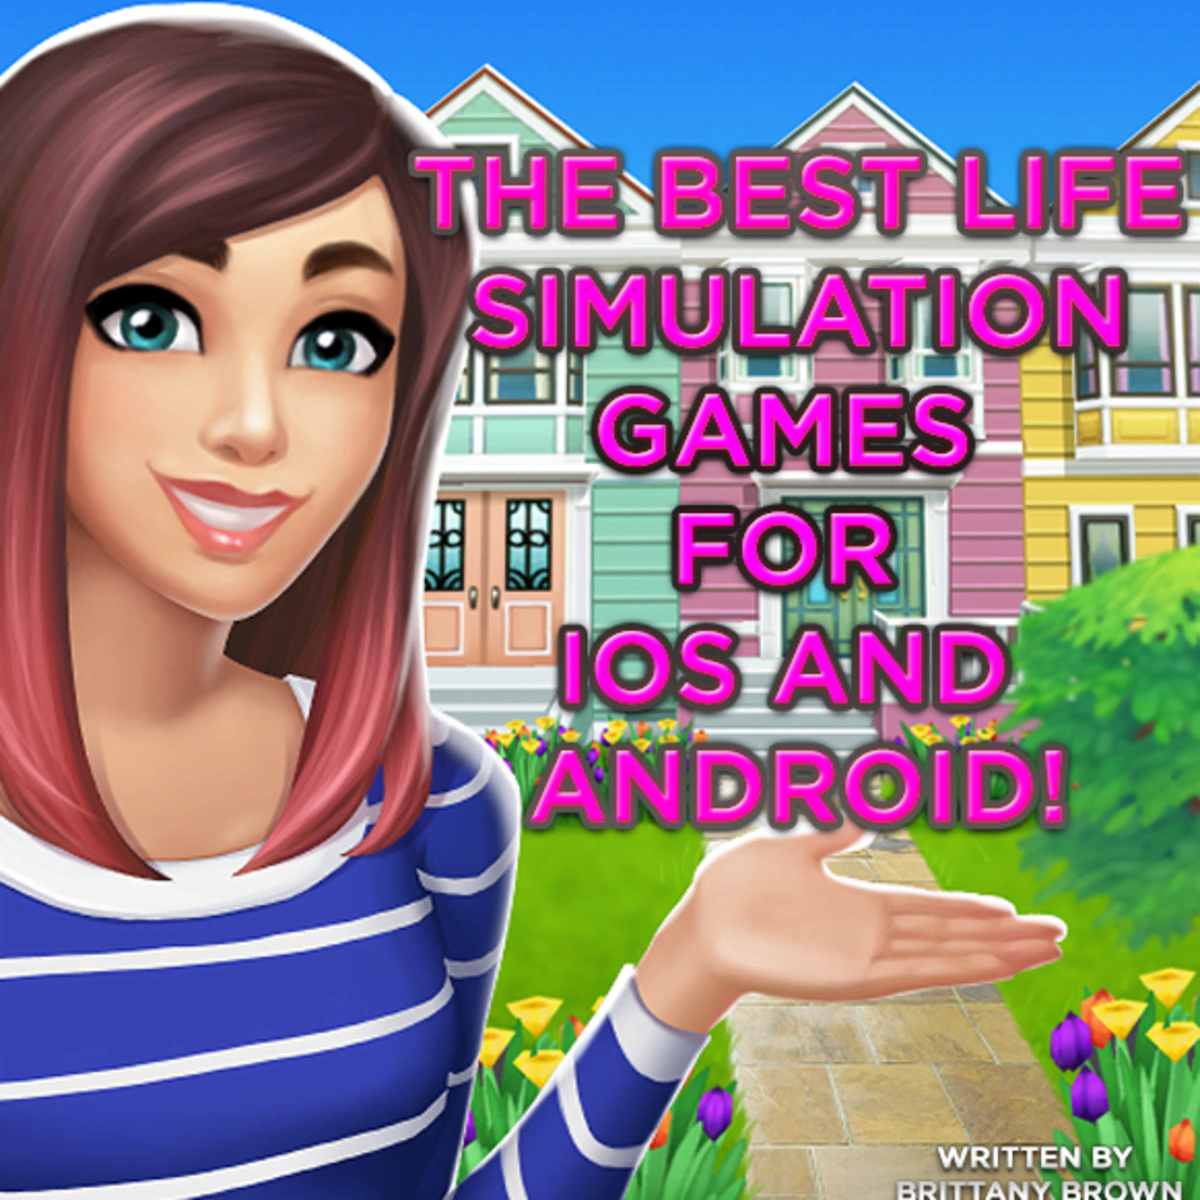 The 8 Best Life Simulation Games for iOS and Android! - LevelSkip